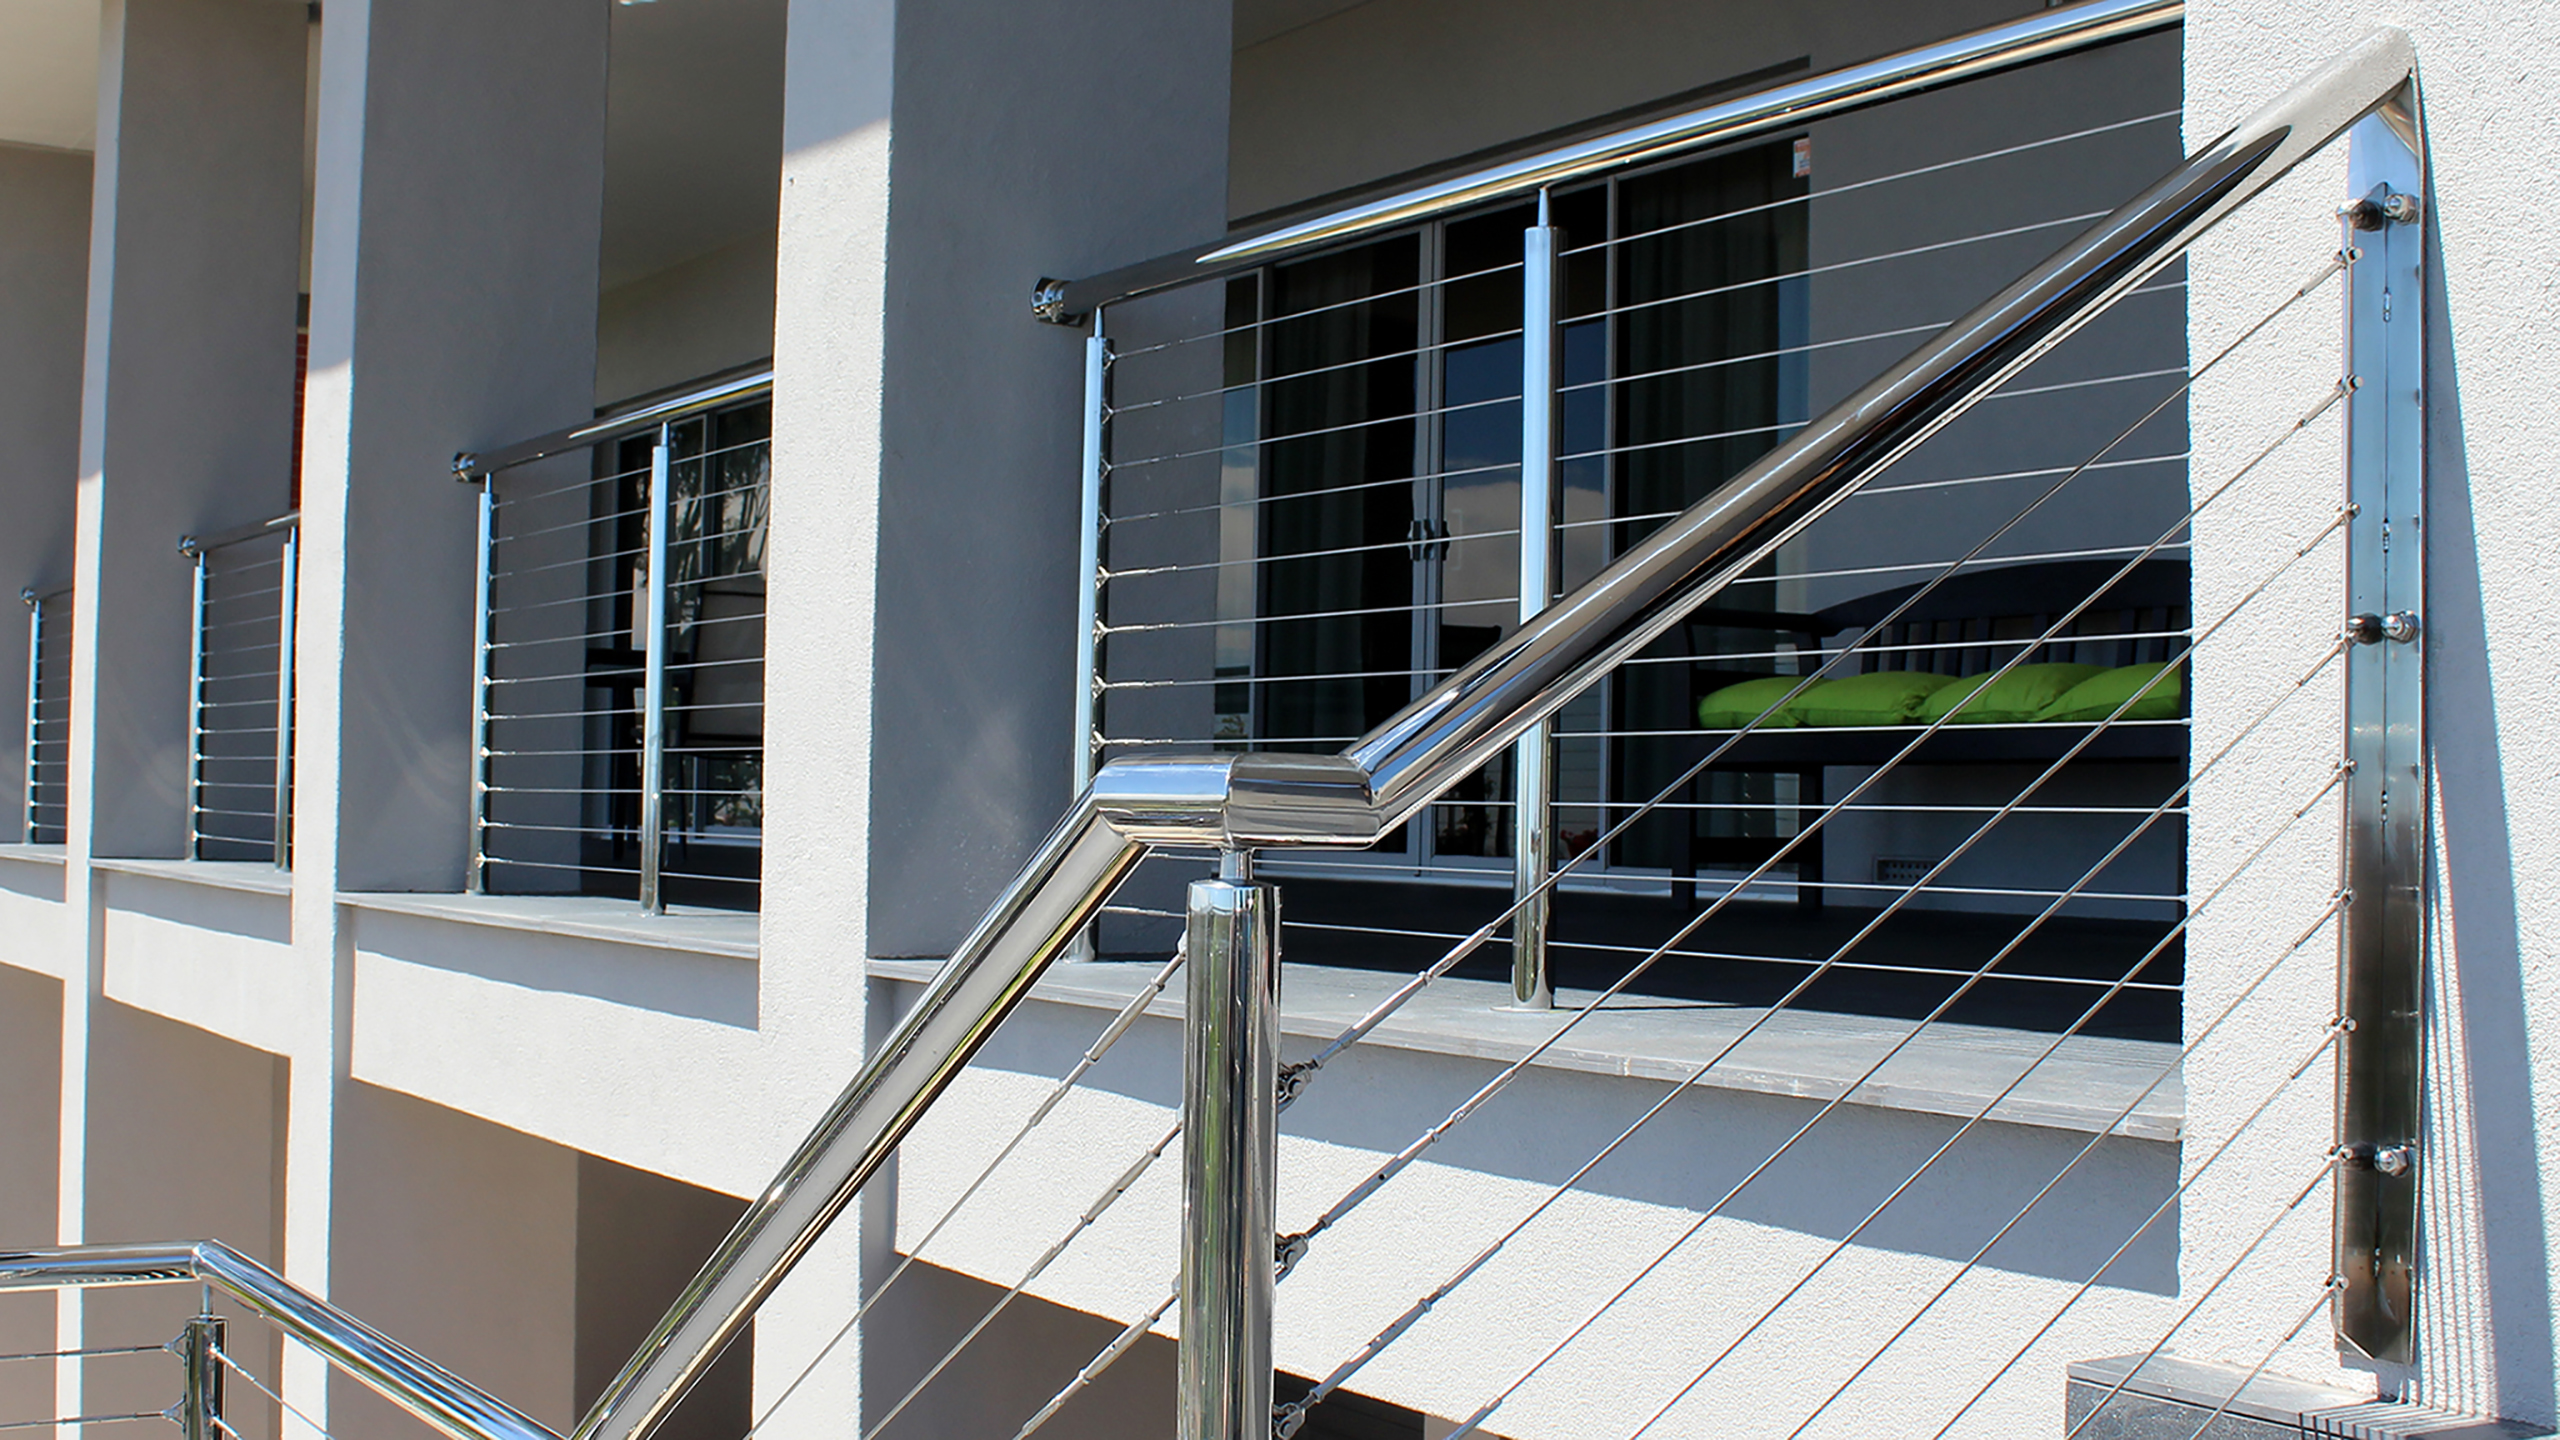 United Metalwork is the Balustrade Expert in Perth